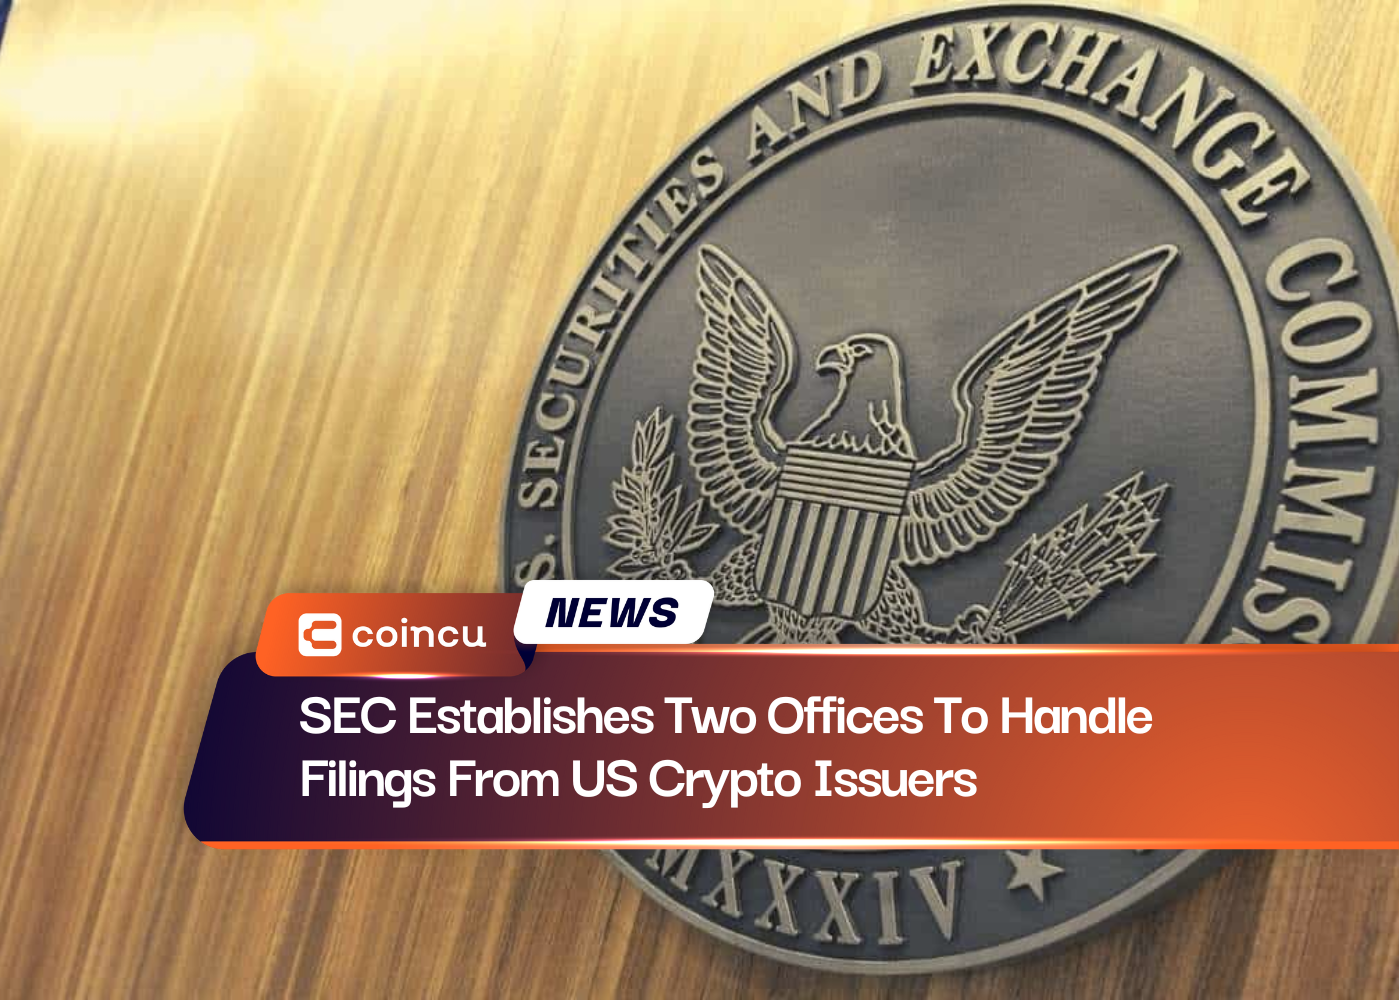 SEC Establishes Two Offices To Handle Filings From US Crypto Issuers